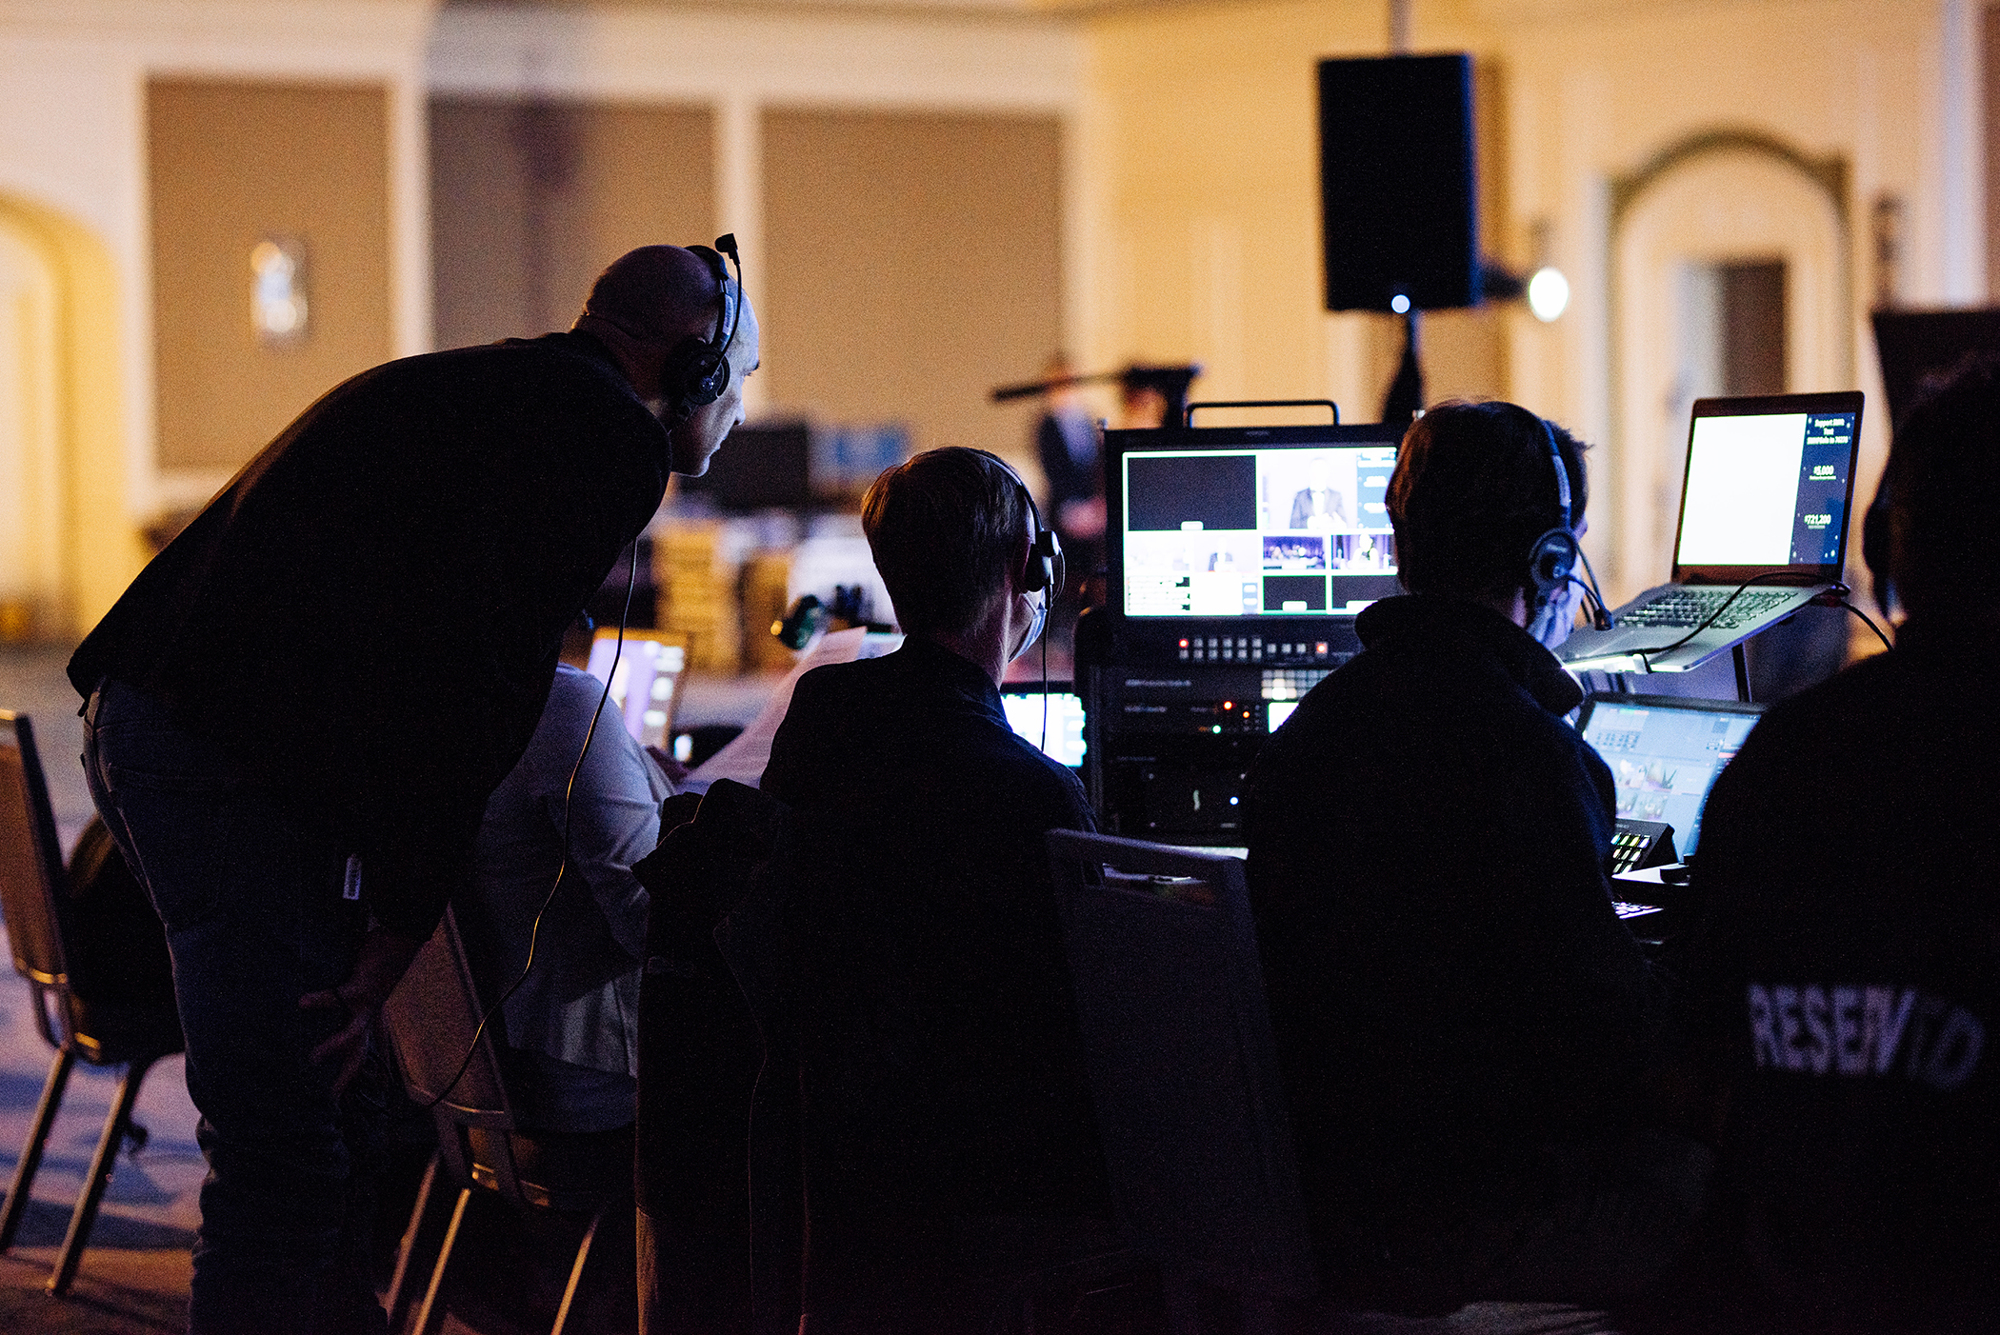 SMHF staff worked with an audio and video company to make sure the event ran smoothly. Courtesy photo.